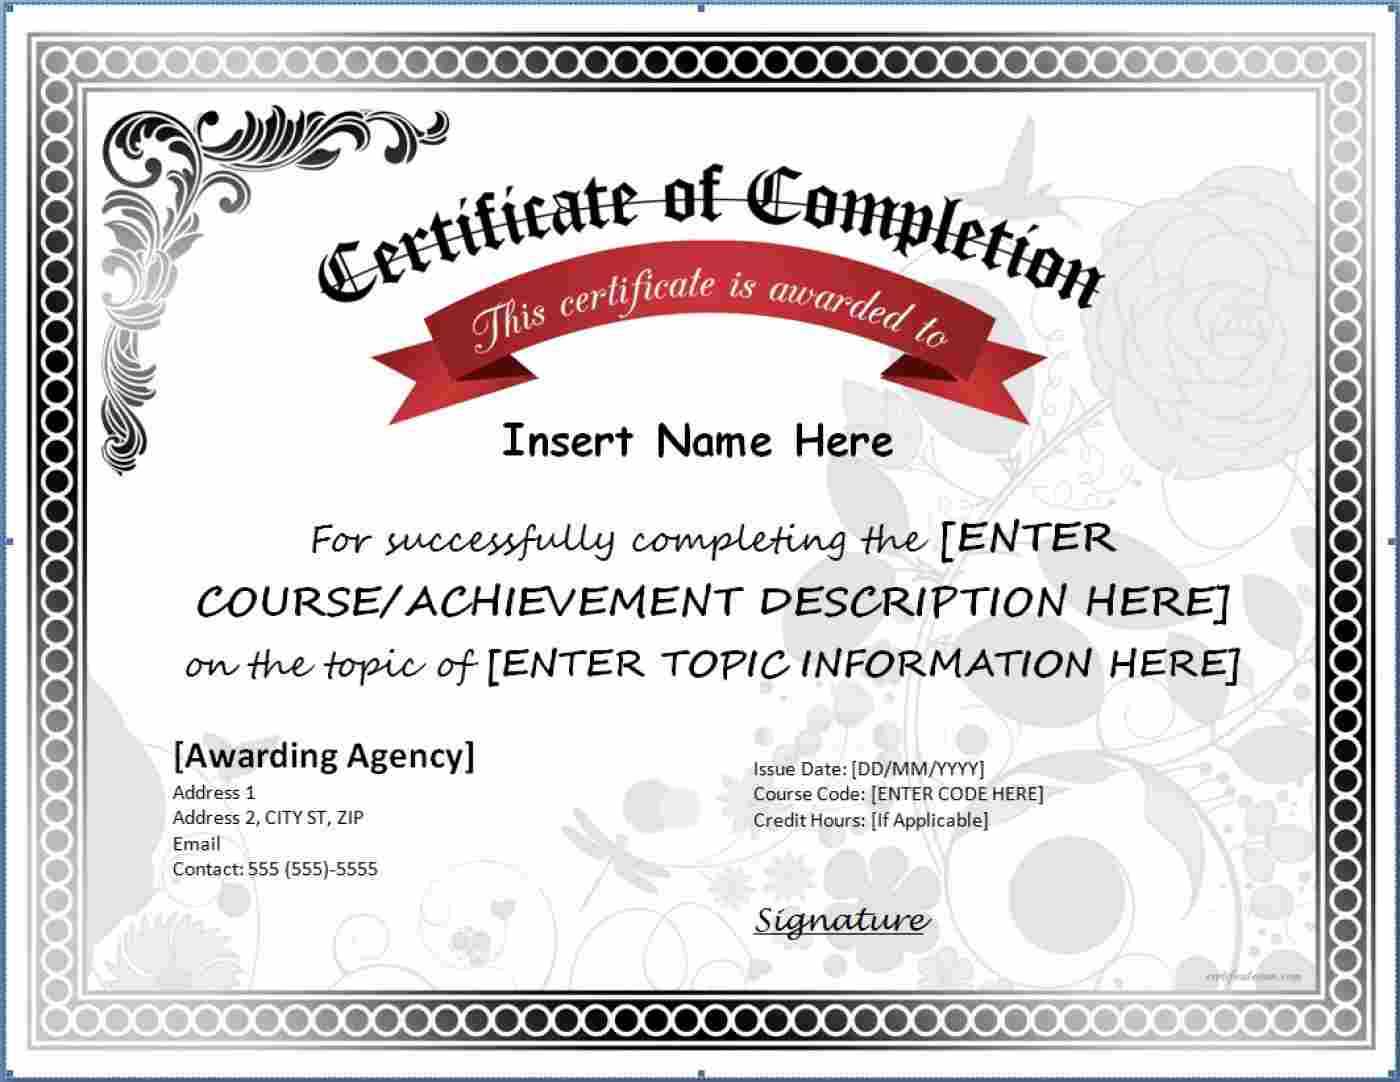 005 Certificate Of Completion Template Free Printable With Certificate Of Completion Template Free Printable